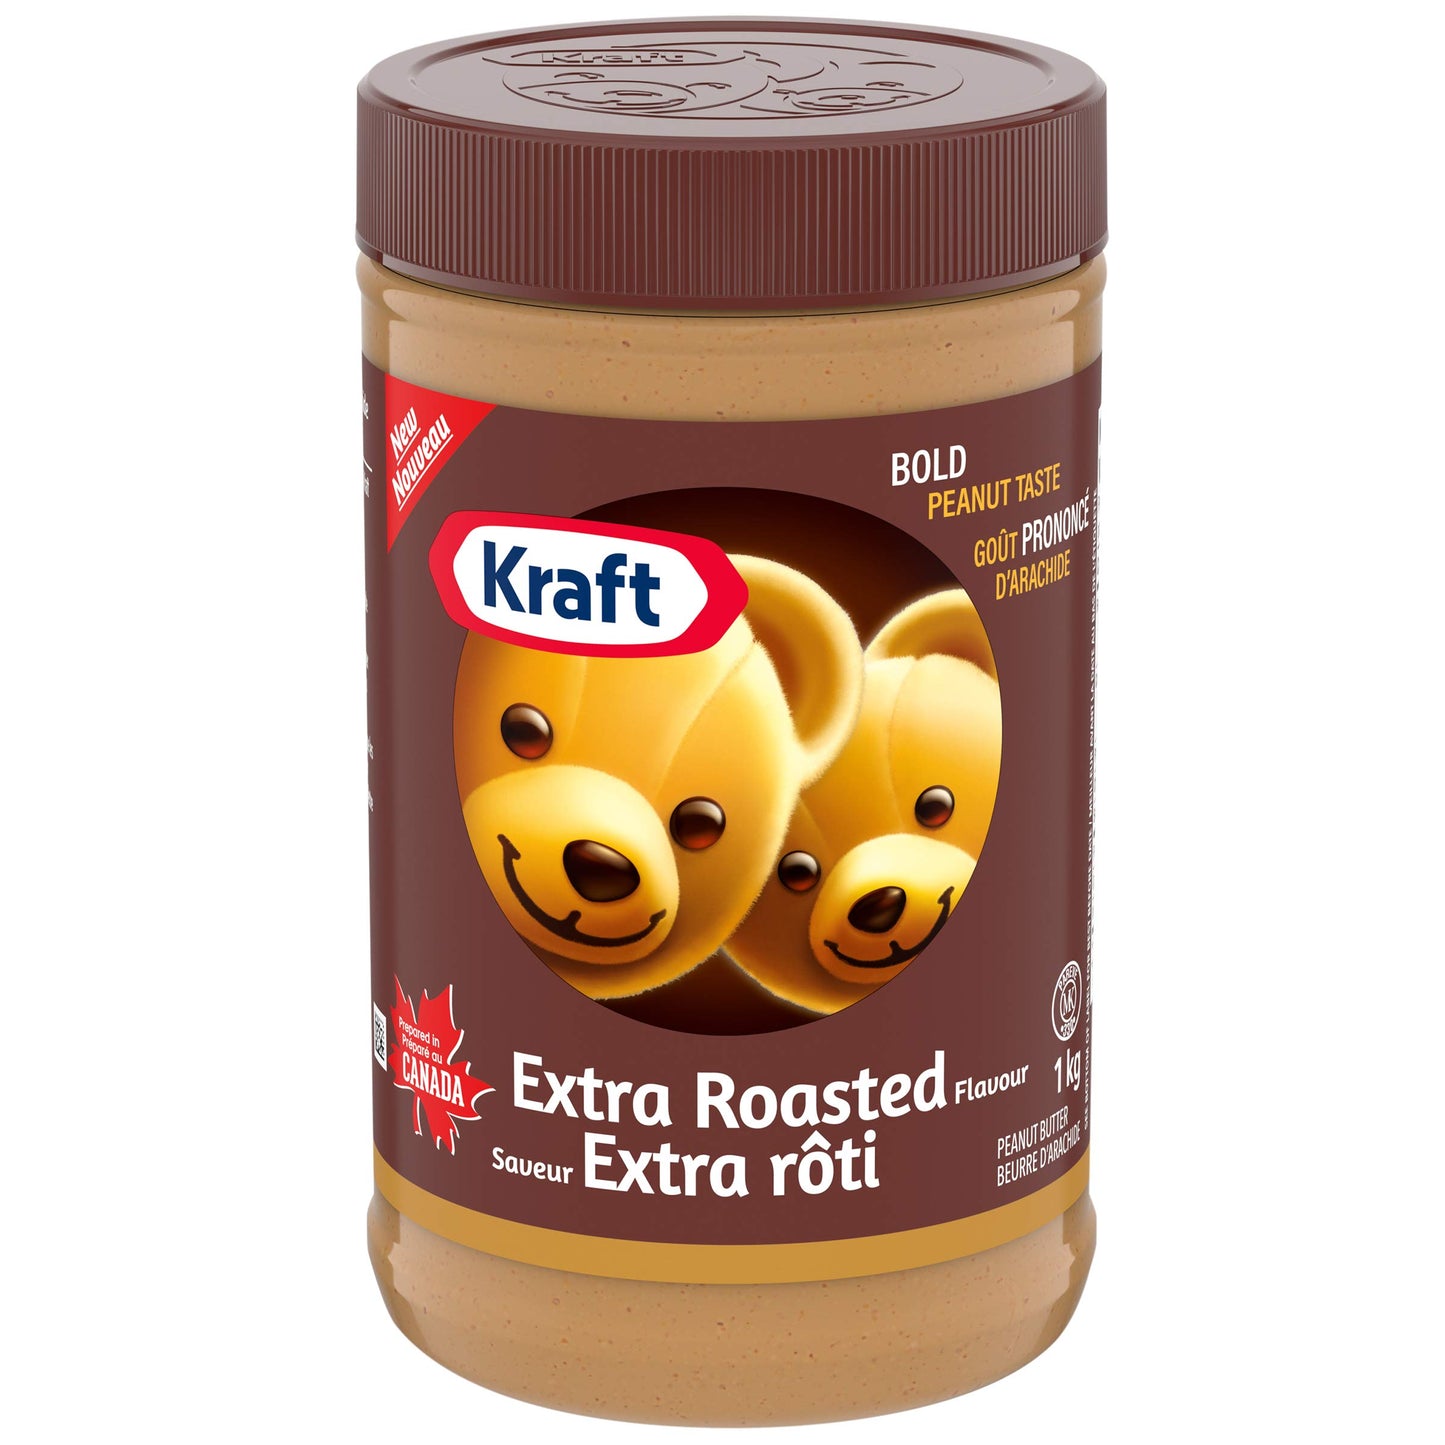 Kraft Extra Roasted Peanut Butter Canadian Ingredients 1kg/2.2lbs (Shipped from Canada)